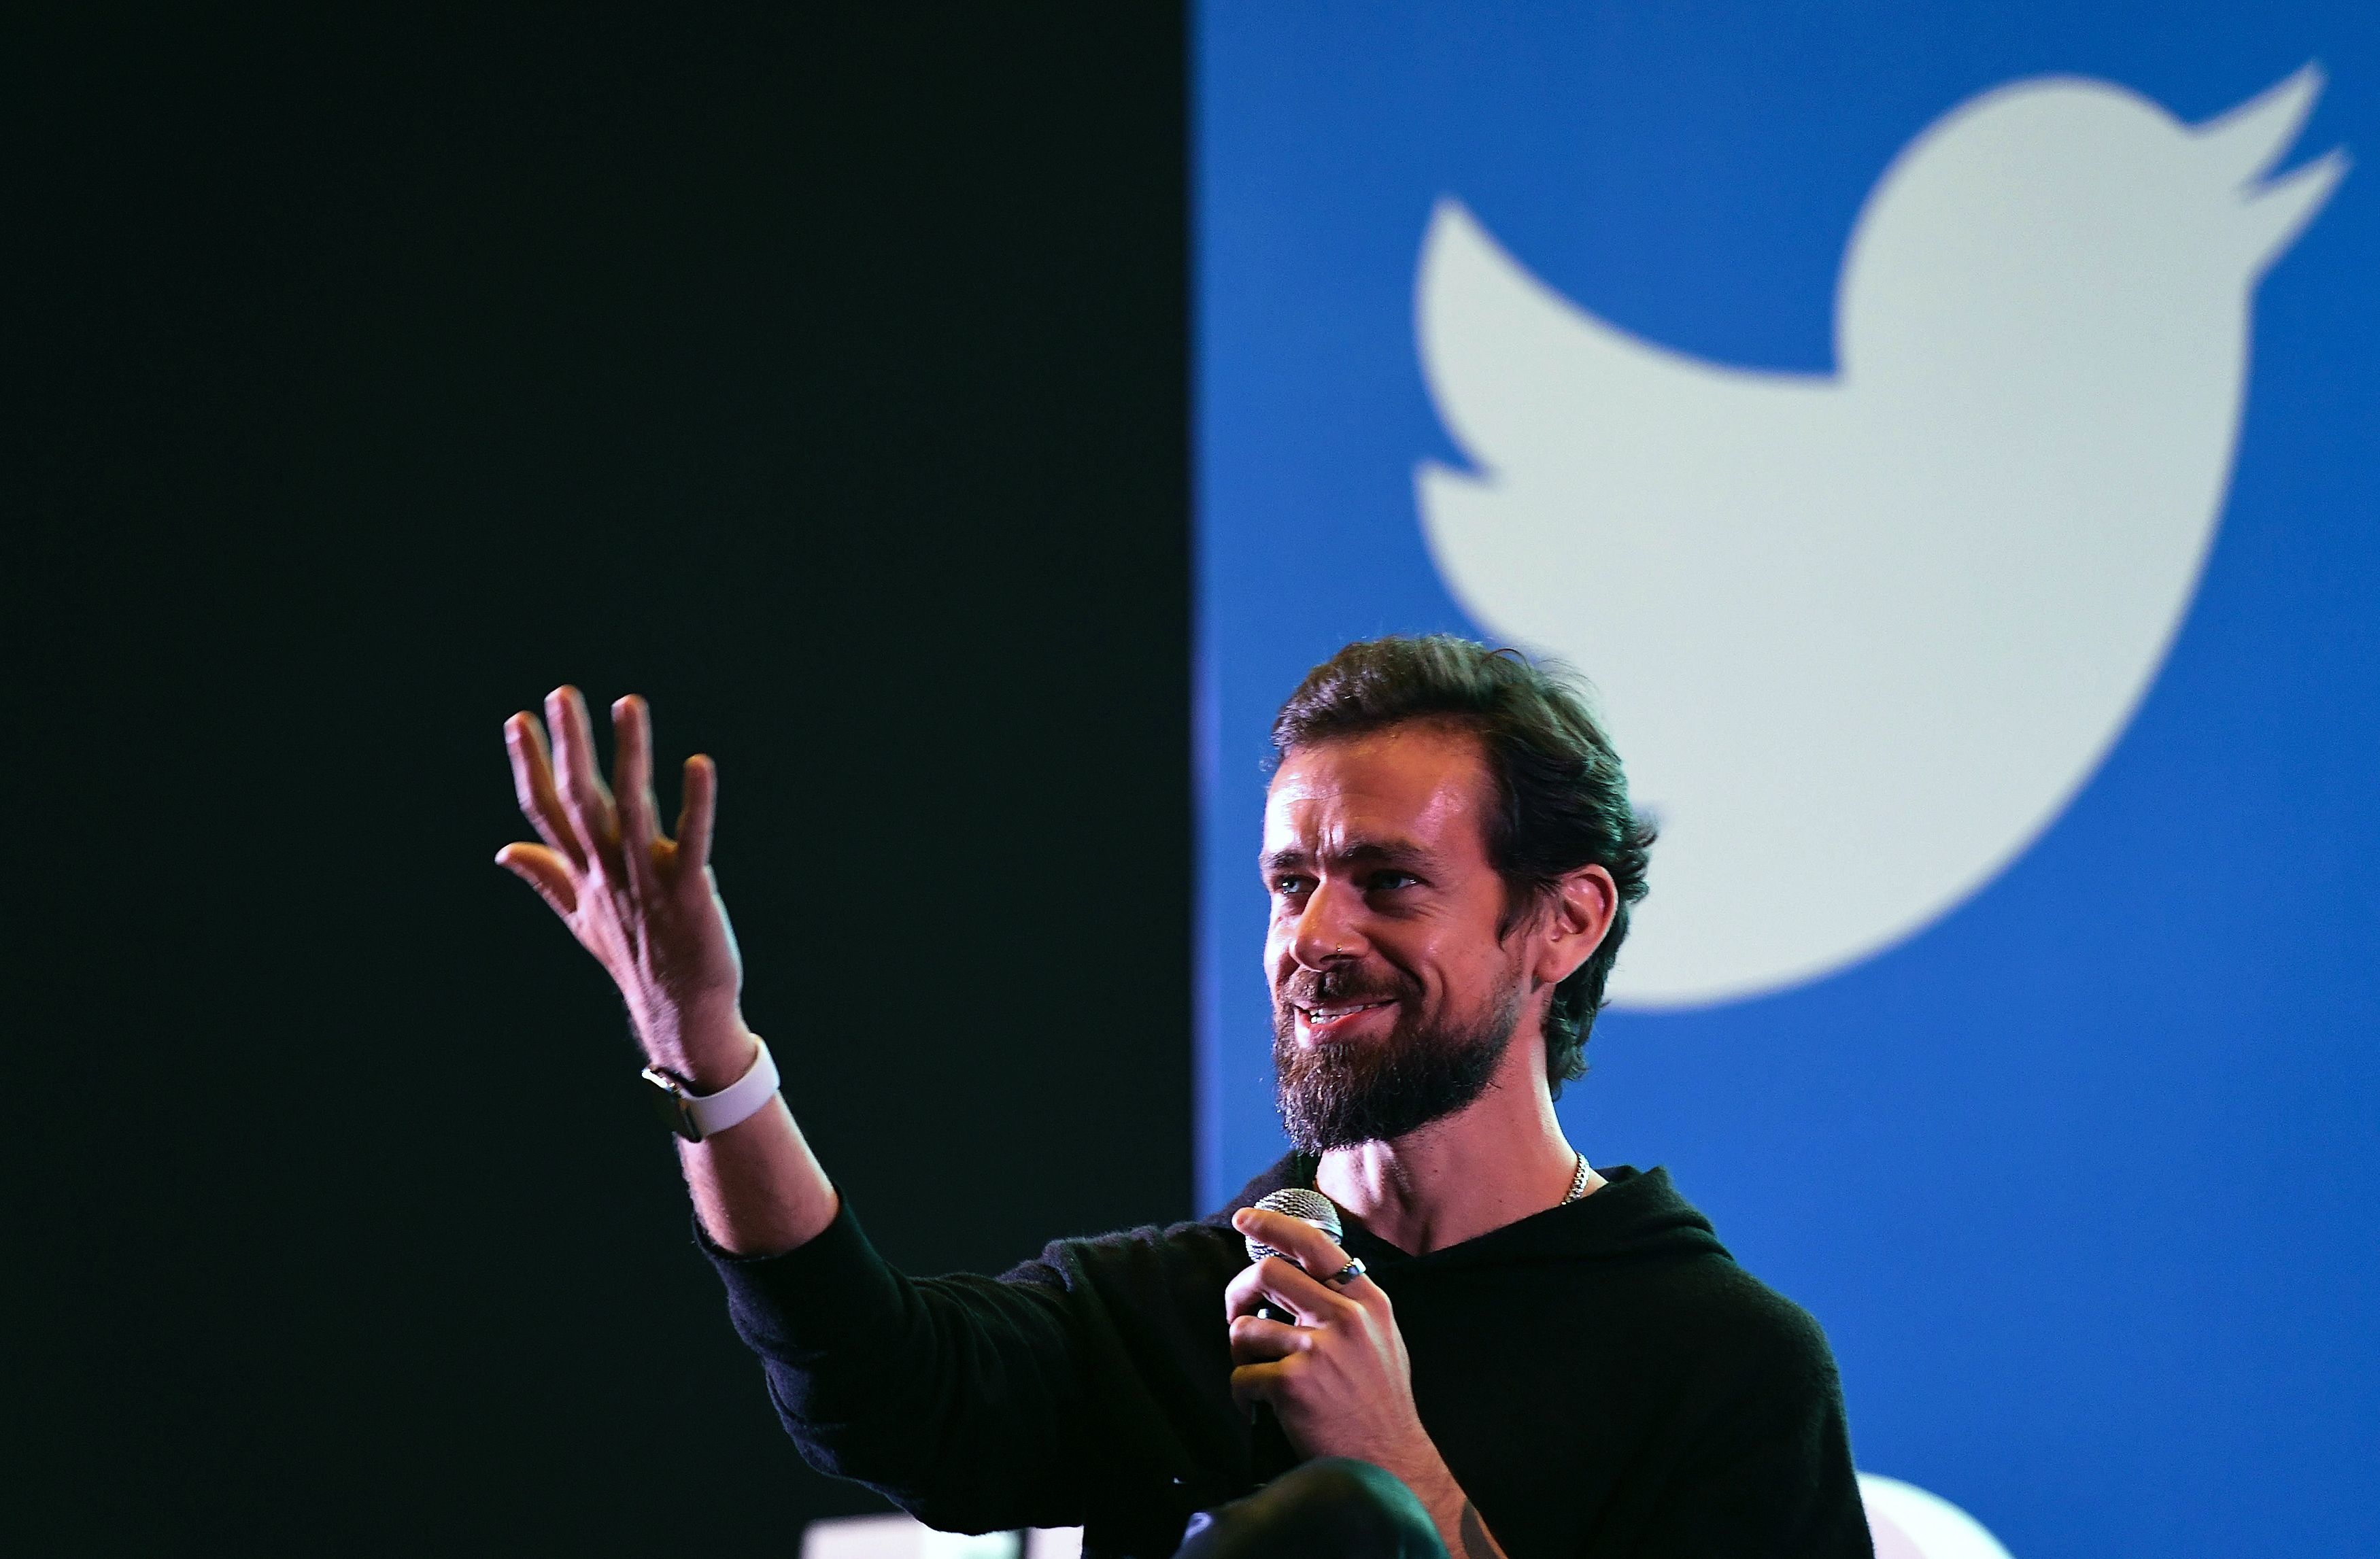 Twitter is finally embracing change, and it seems to be working